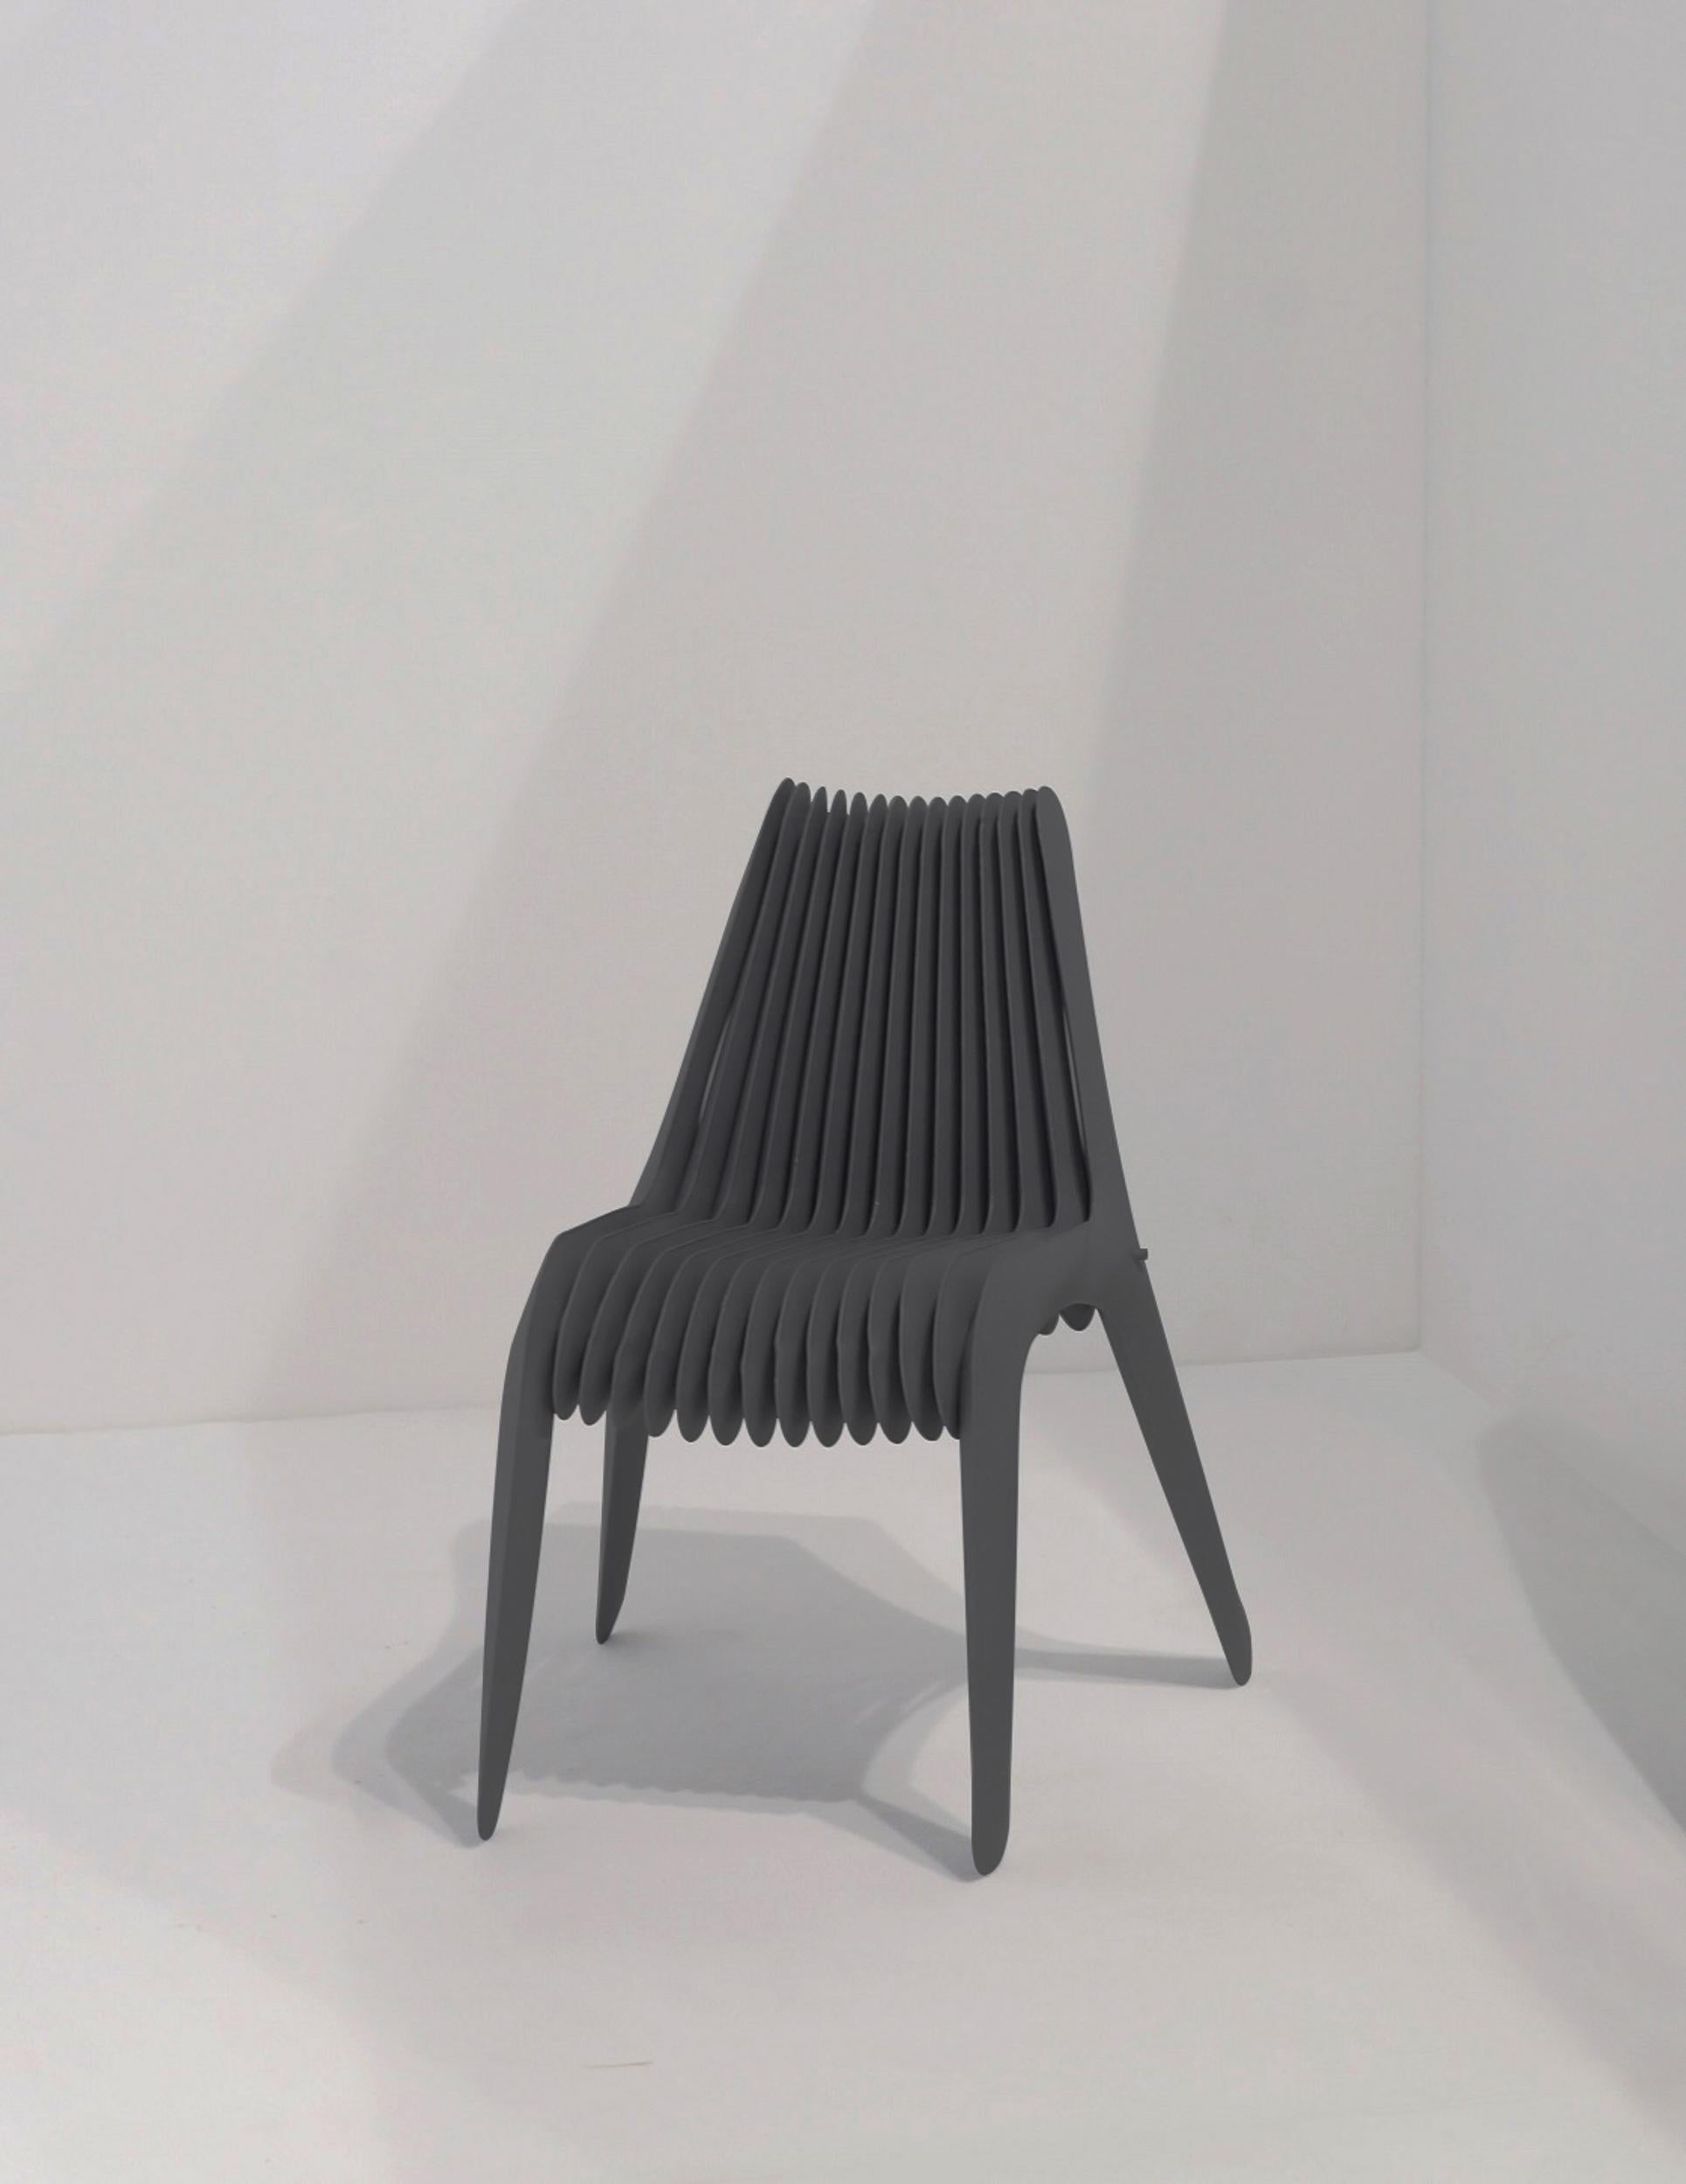 Steel In Rotation Chair by Zieta, carbon steel
White Matt

Measures: 80 x 45 x 60 cm.

SIR NO. 3 CHAIR is a conceptual dialogue between design and art. Like many of Oskar Zieta’s objects, SIR chairs broaden the borders between disciplines. The